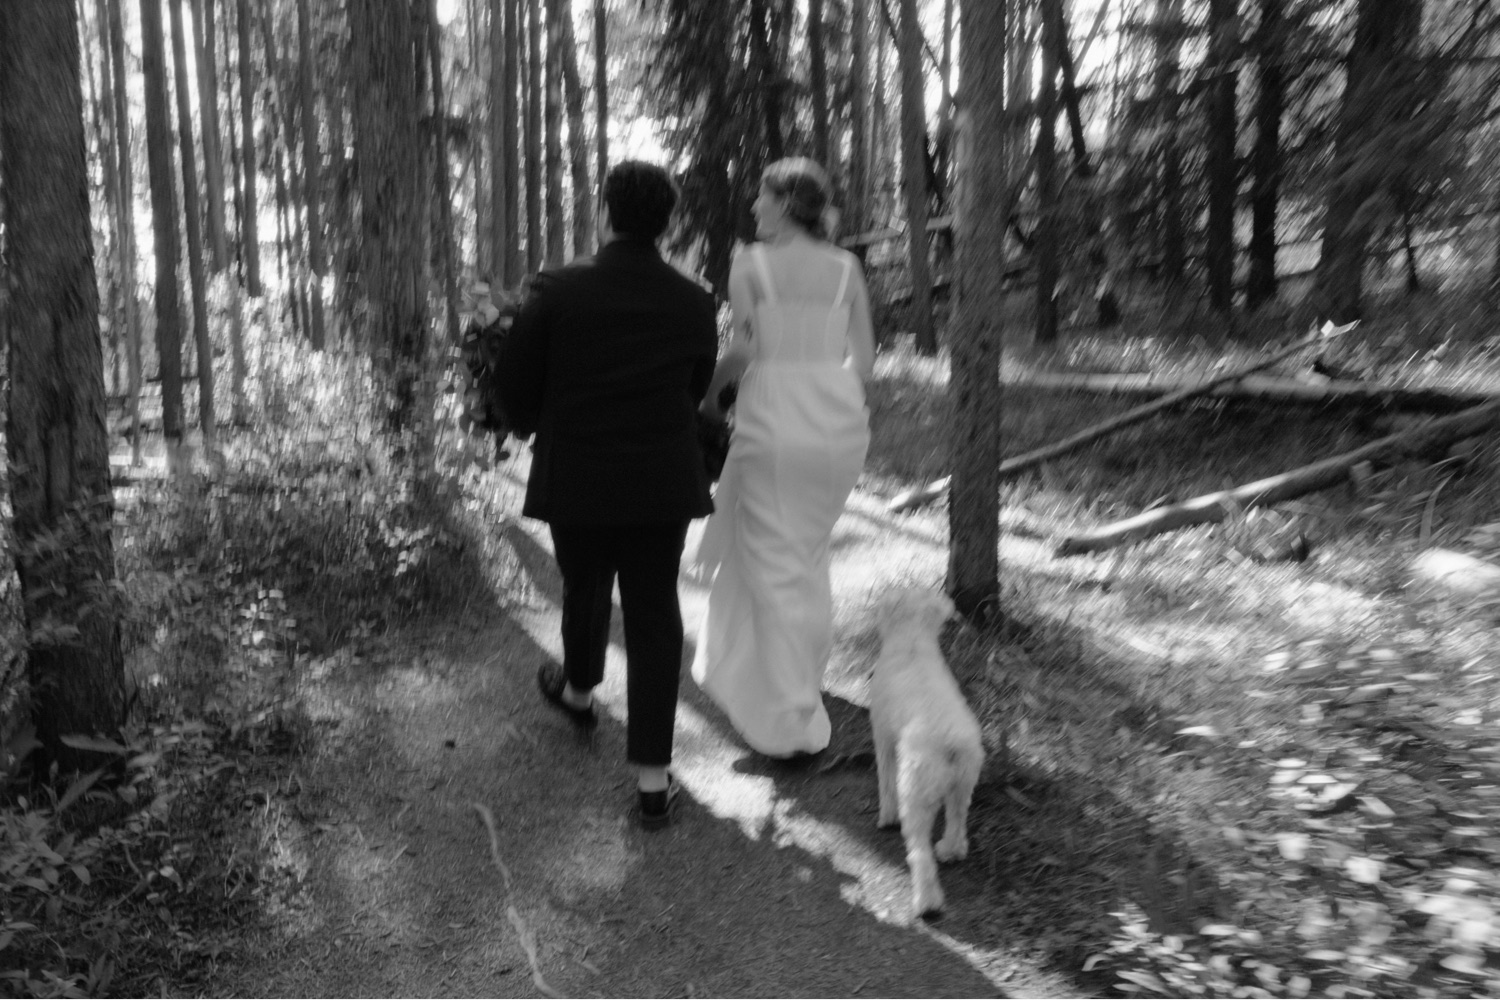 Newly married couple walking with their dog through Lodgepole Pine forest in Banff National Park